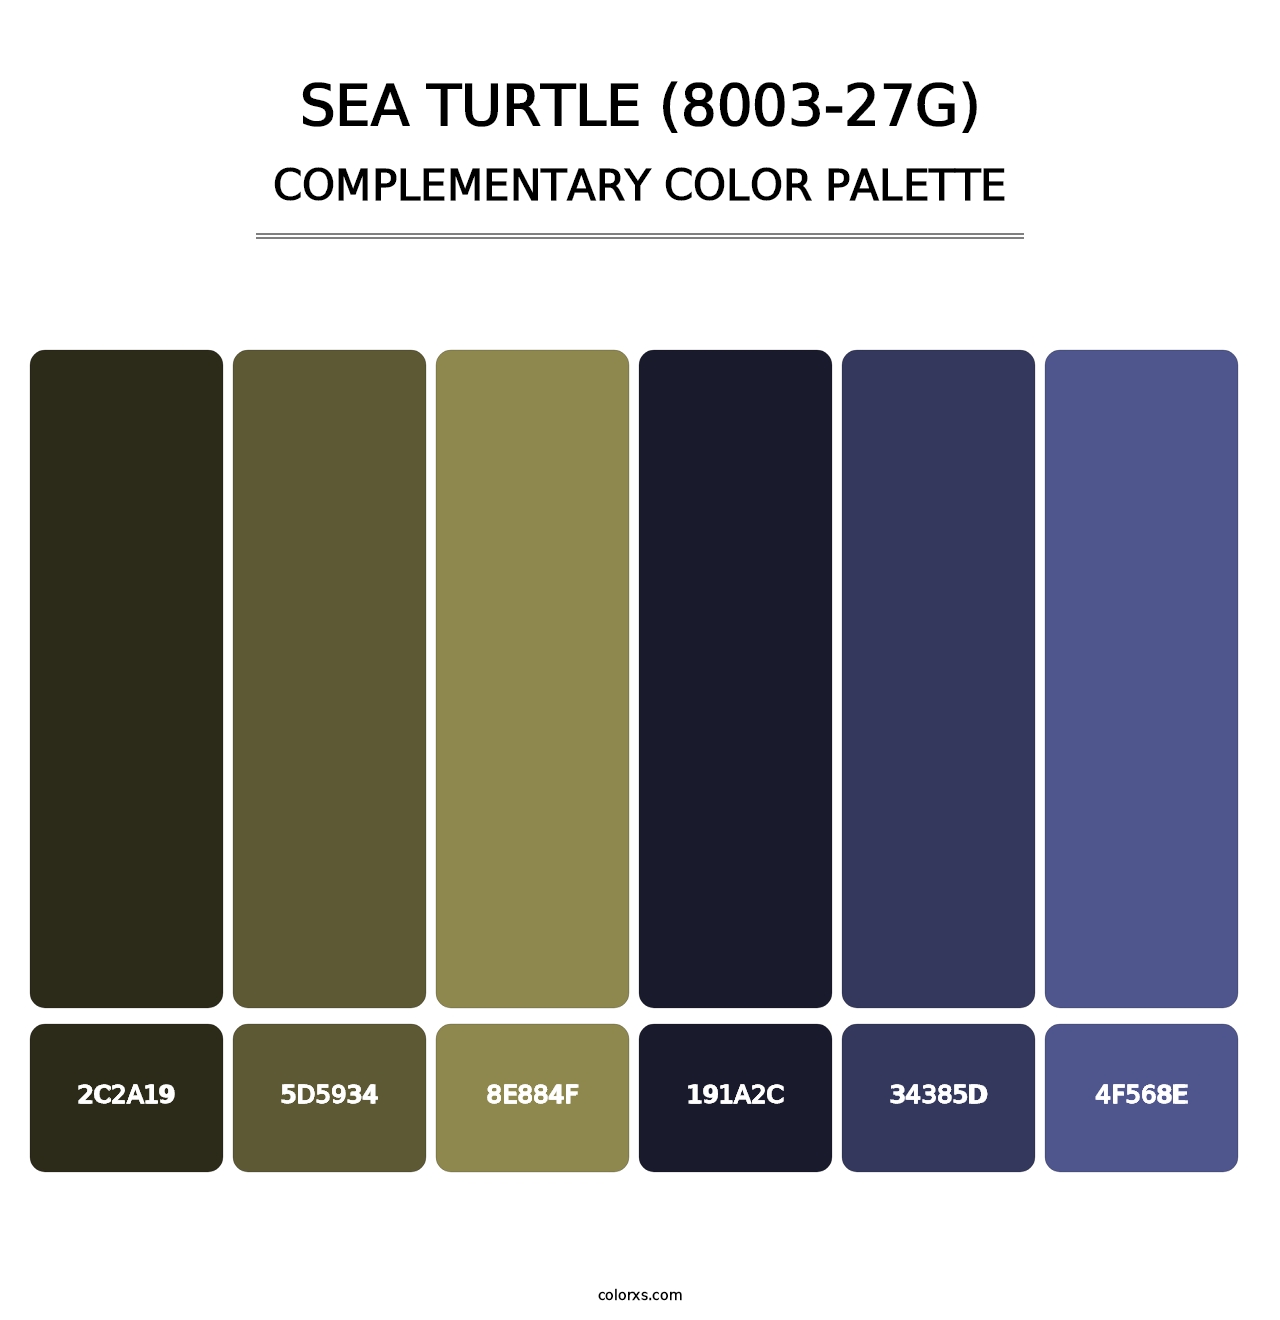 Sea Turtle (8003-27G) - Complementary Color Palette